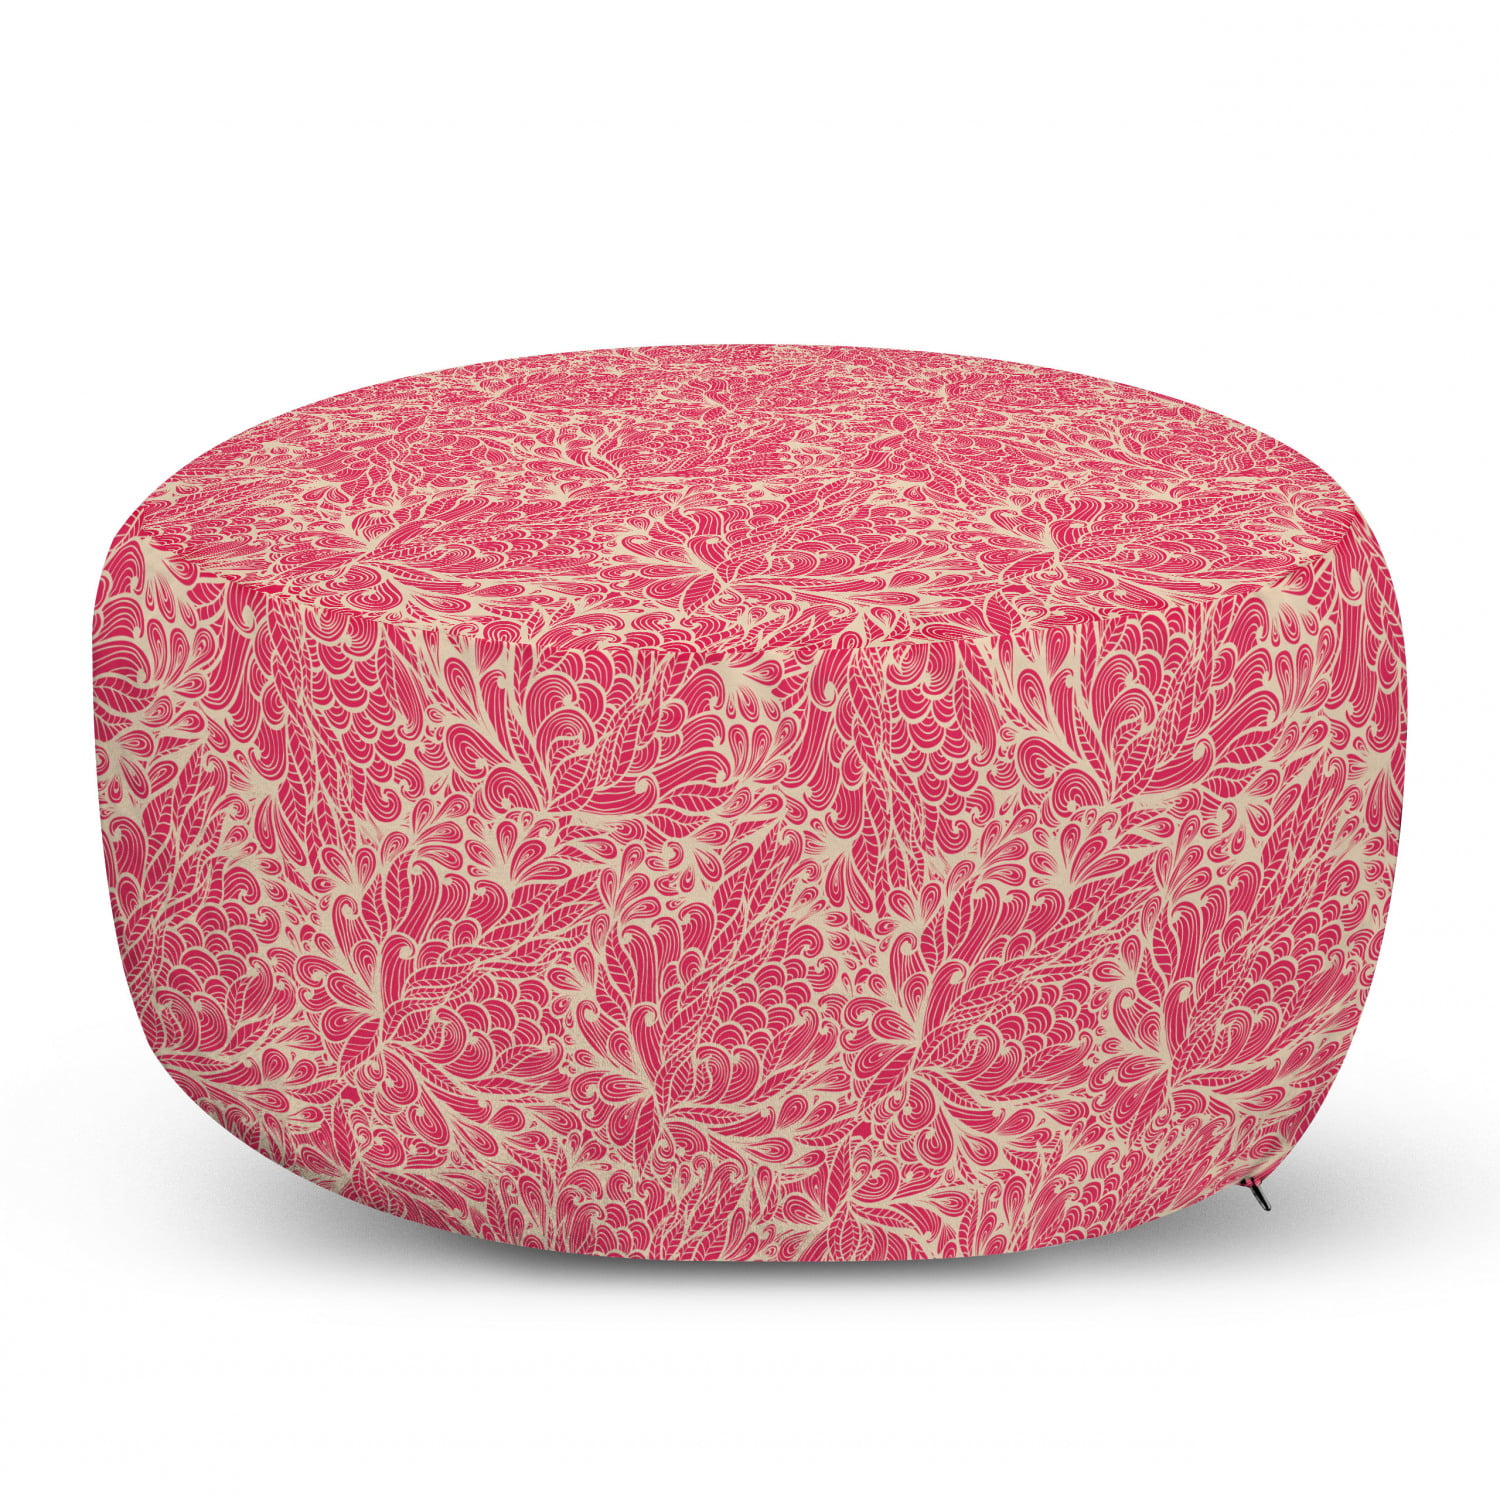 Ambesonne Ladybug Rectangle Pouf Pale Green Red 25 Under Desk Foot Stool for Living Room Office Ottoman with Cover Botanical Beauty Flower Foliage in Vibrant Tones Essence Fragrance of Nature